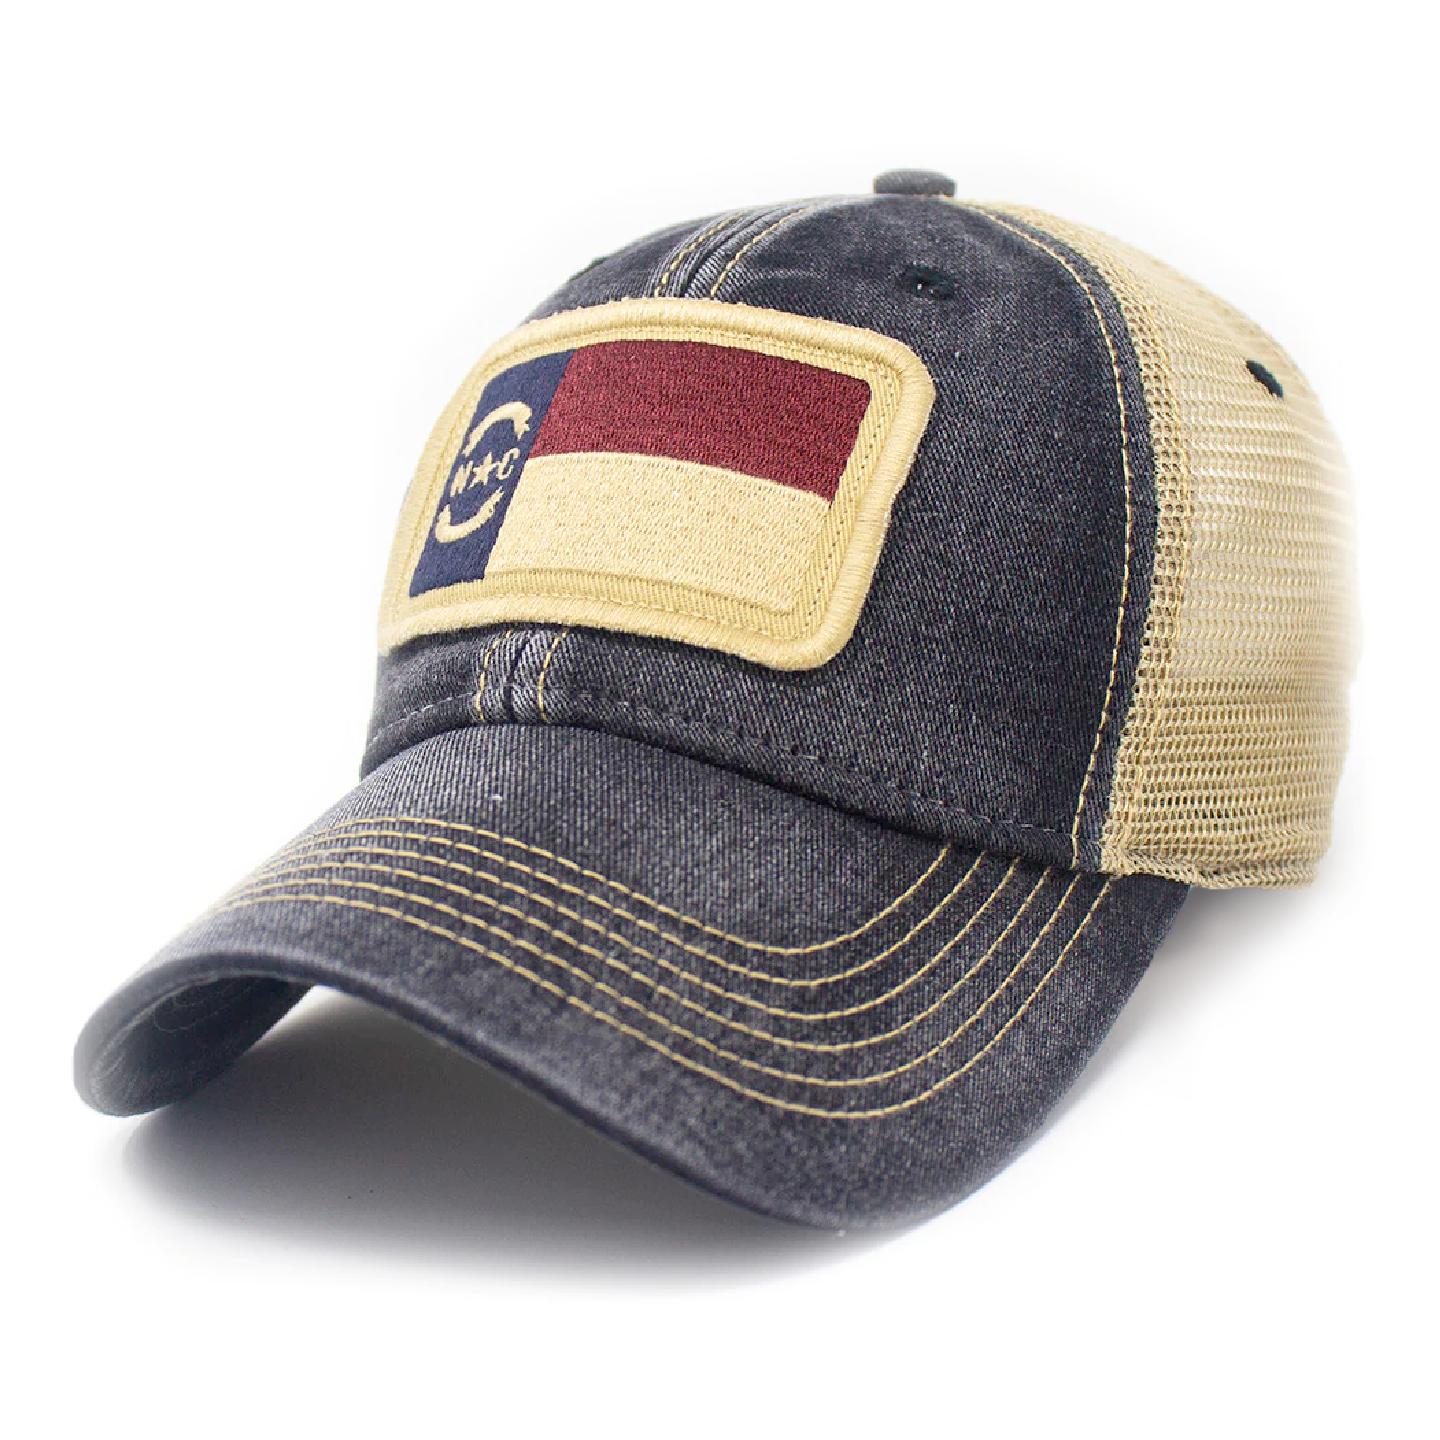 Trucker hat with khaki colored mesh backing, black cotton front panel and bill with tan stitching. Ballcap has an embroidered patch of the North Carolina flag in in the center.